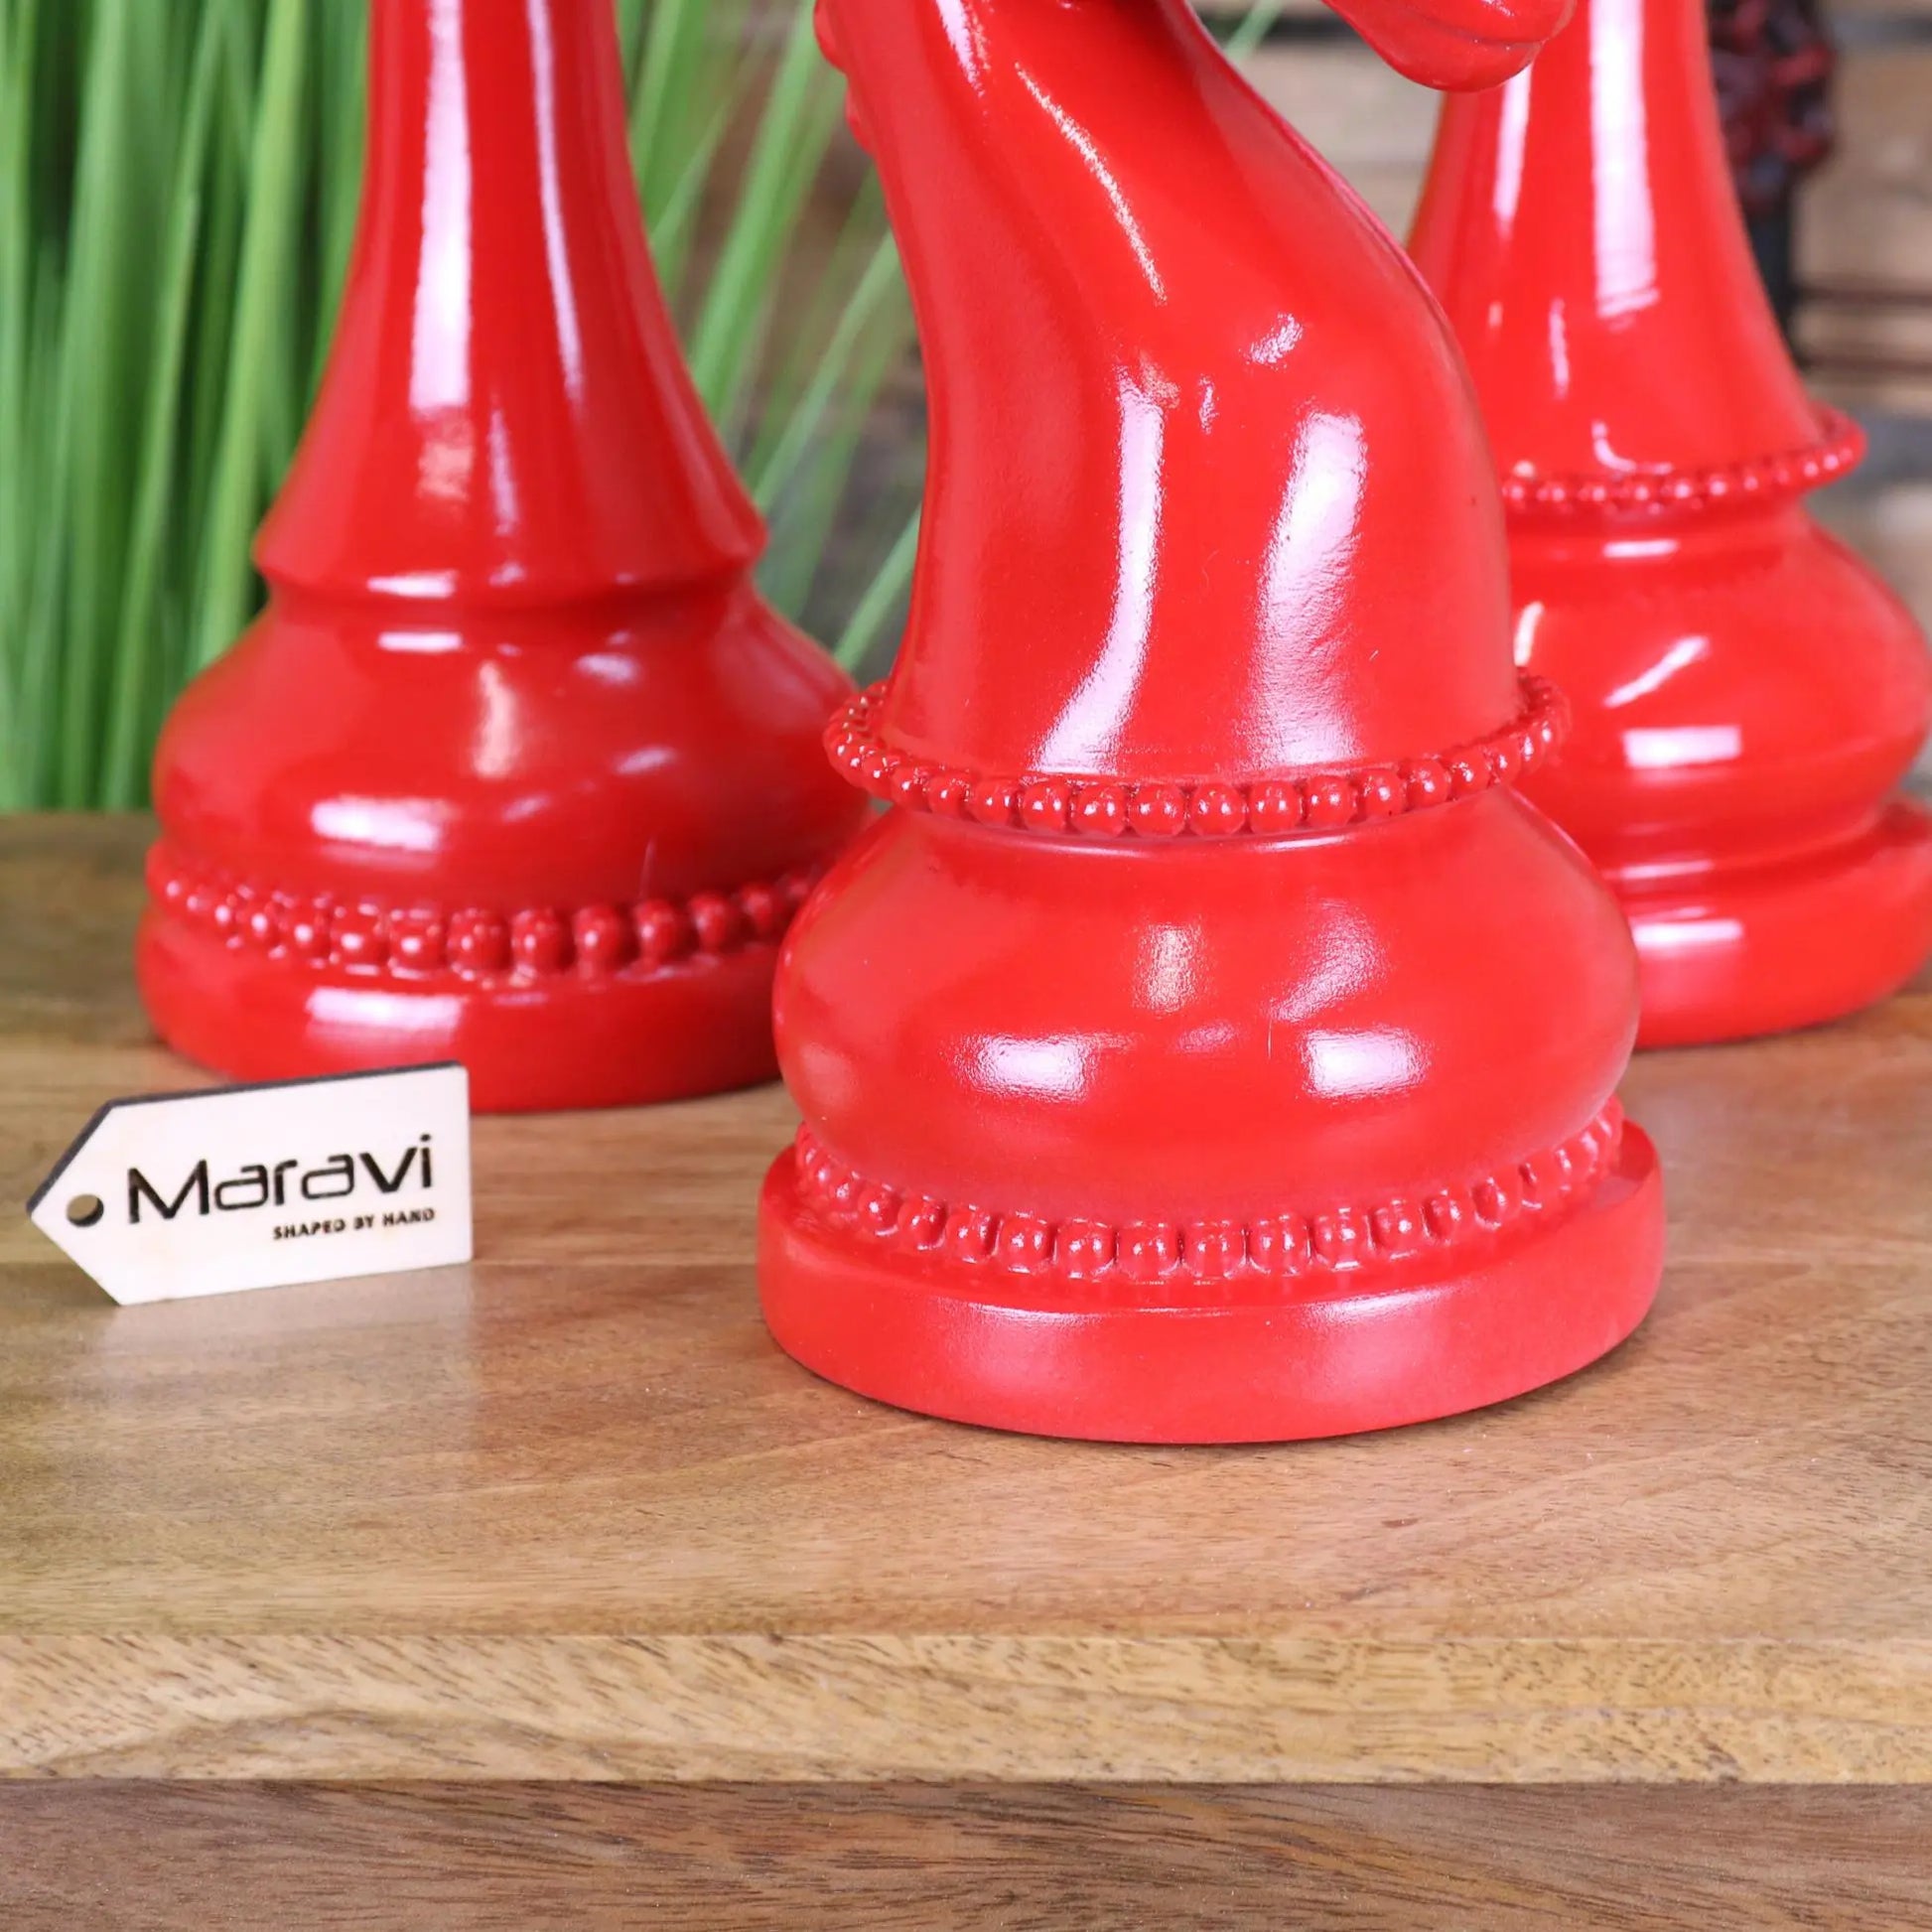 Shatranj Set of 3 Chess Pieces Ornaments Red Accent - Closeup of Base